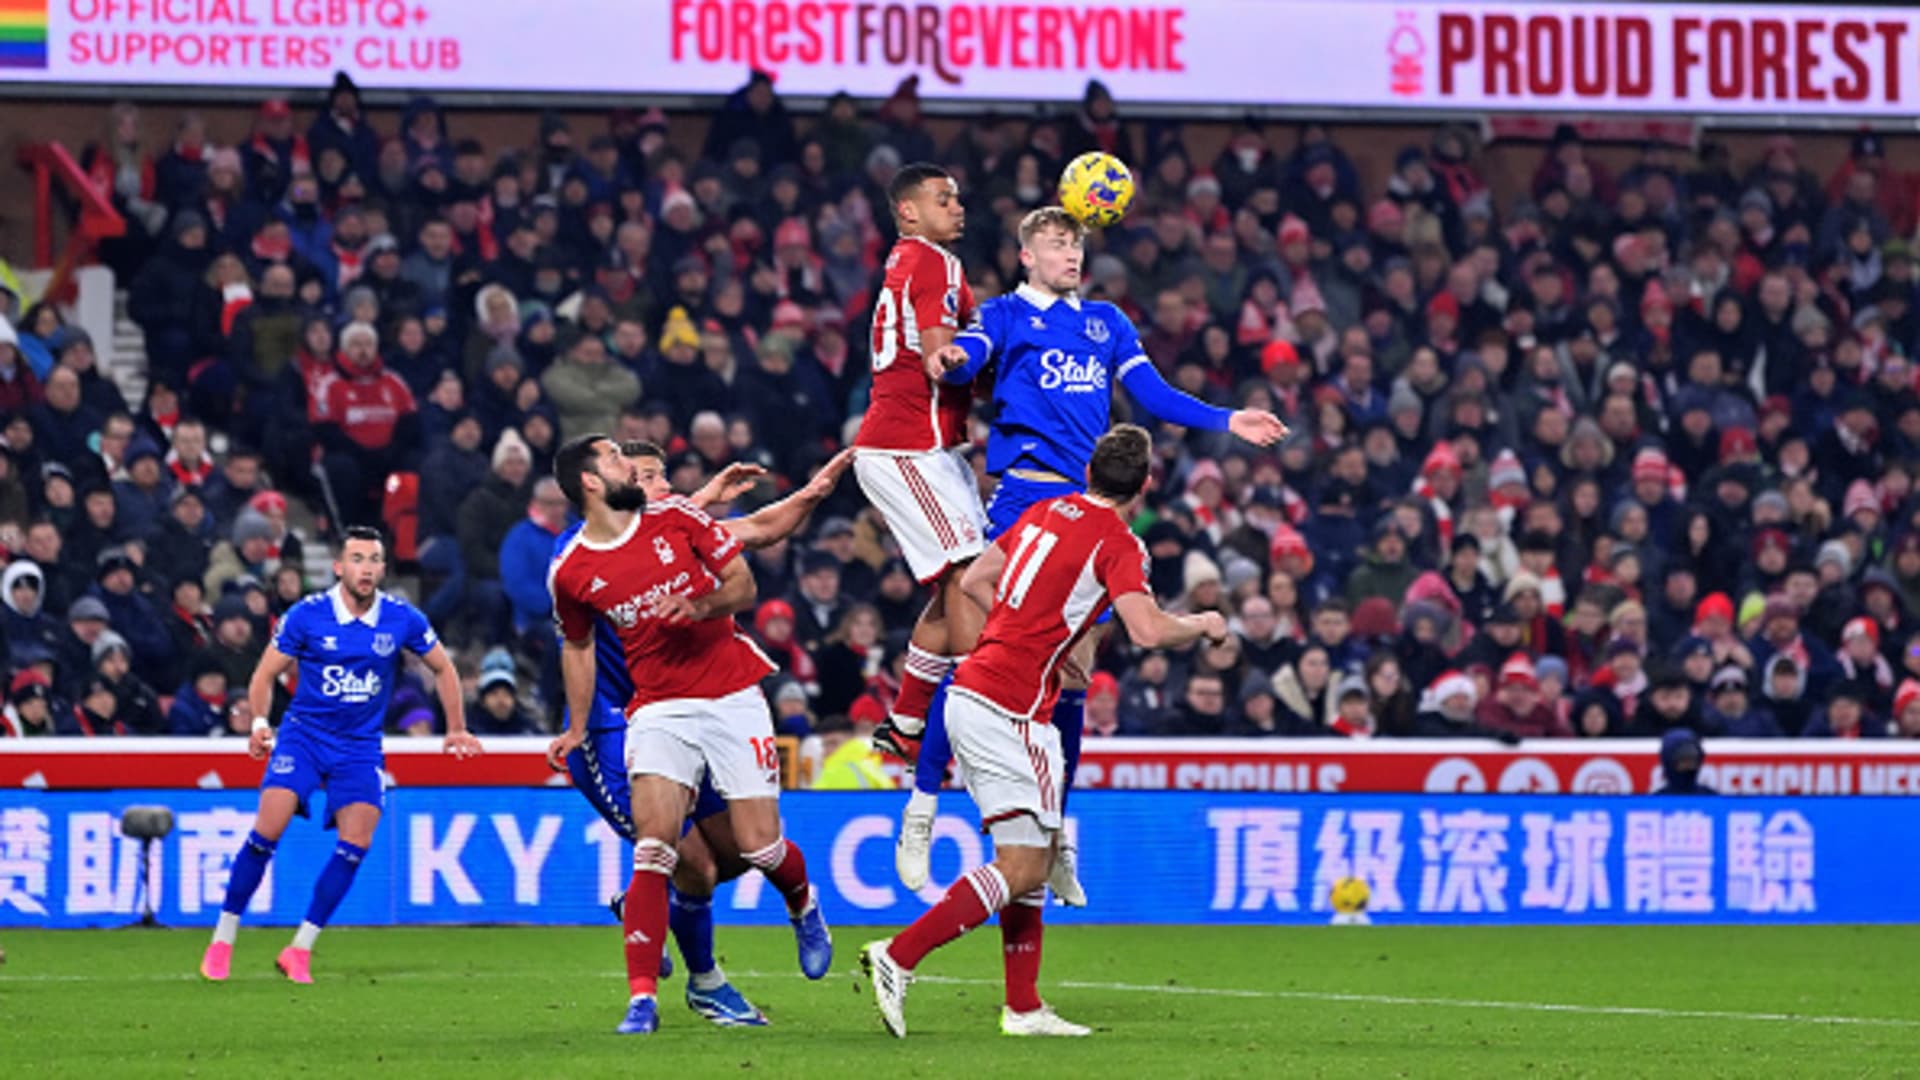 Soccer-Everton, Forest charged for breaching Premier League profitability and sustainability rules